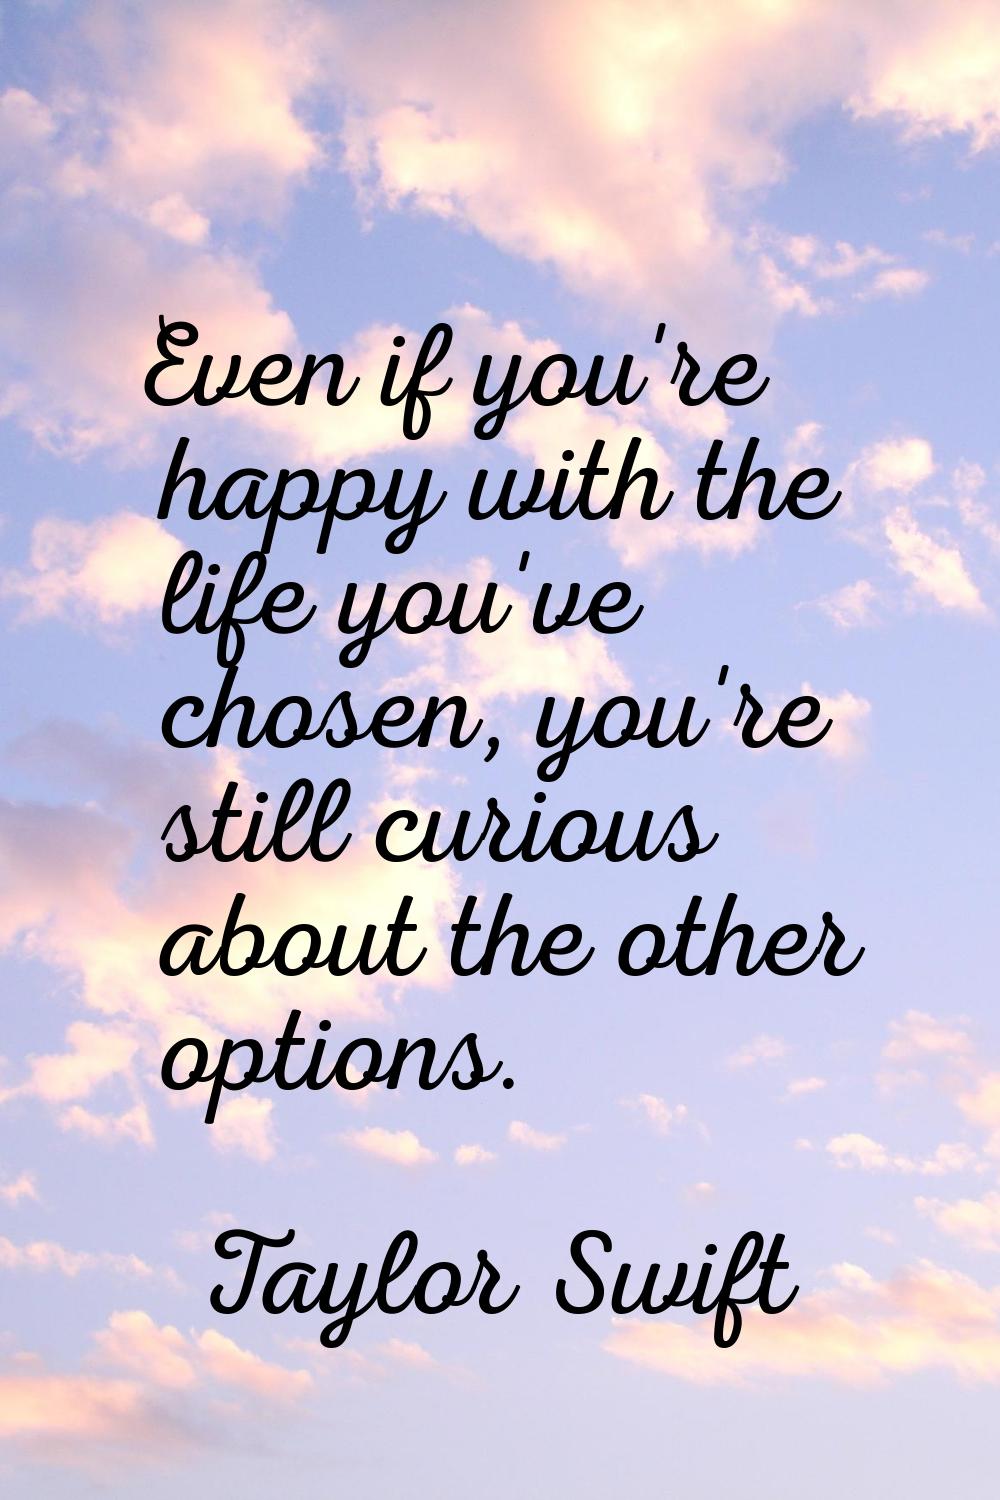 Even if you're happy with the life you've chosen, you're still curious about the other options.